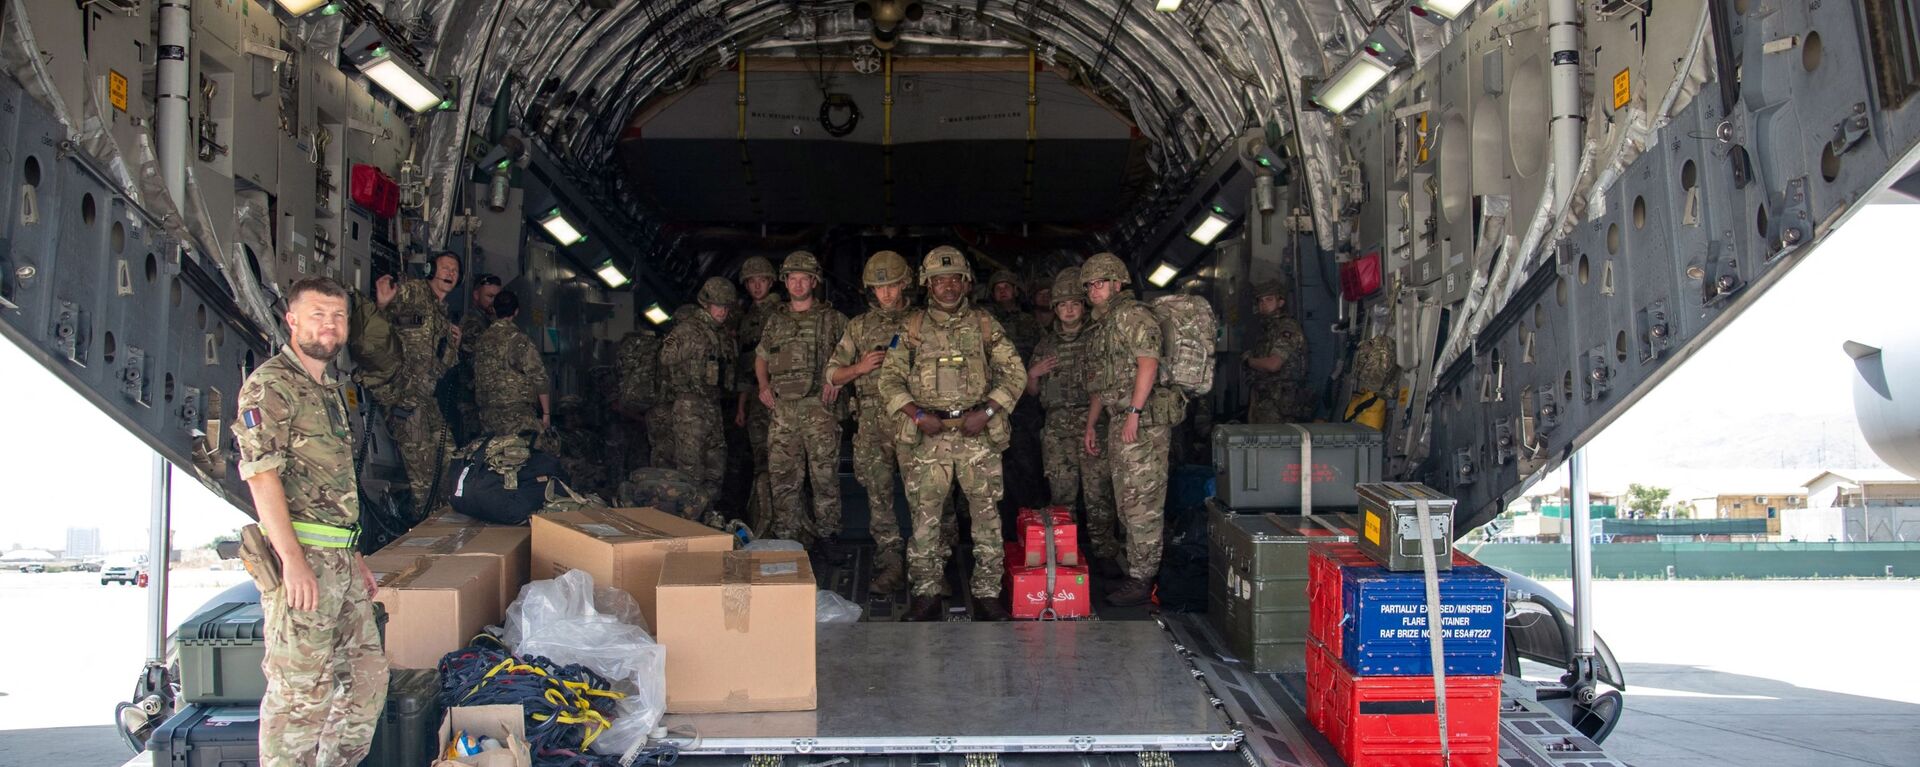 A handout picture taken and released by the British Ministry of Defence (MOD) on August 15, 2021 shows members of the British Army, from 16 Air Assault Brigade, as they disembark from an RAF Voyager aircraft after landing in Kabul, Afghanistan, to assist in evacuating British nationals and entitled persons as part of Operation PITTING - Sputnik International, 1920, 17.08.2021